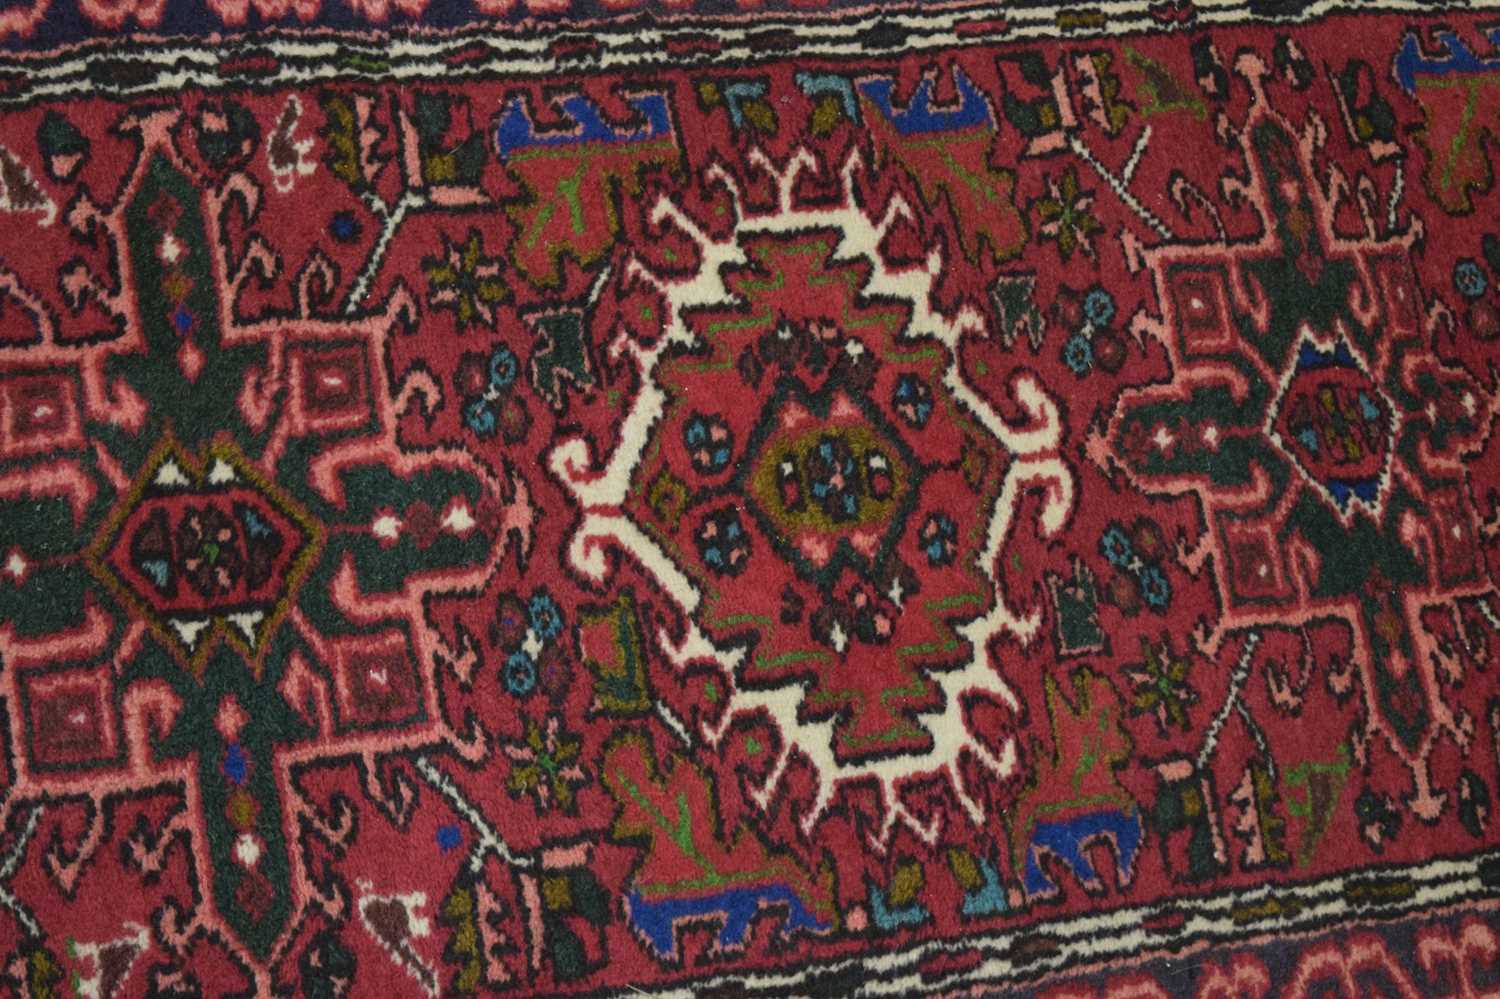 Middle Eastern red ground wool runner - Image 7 of 8